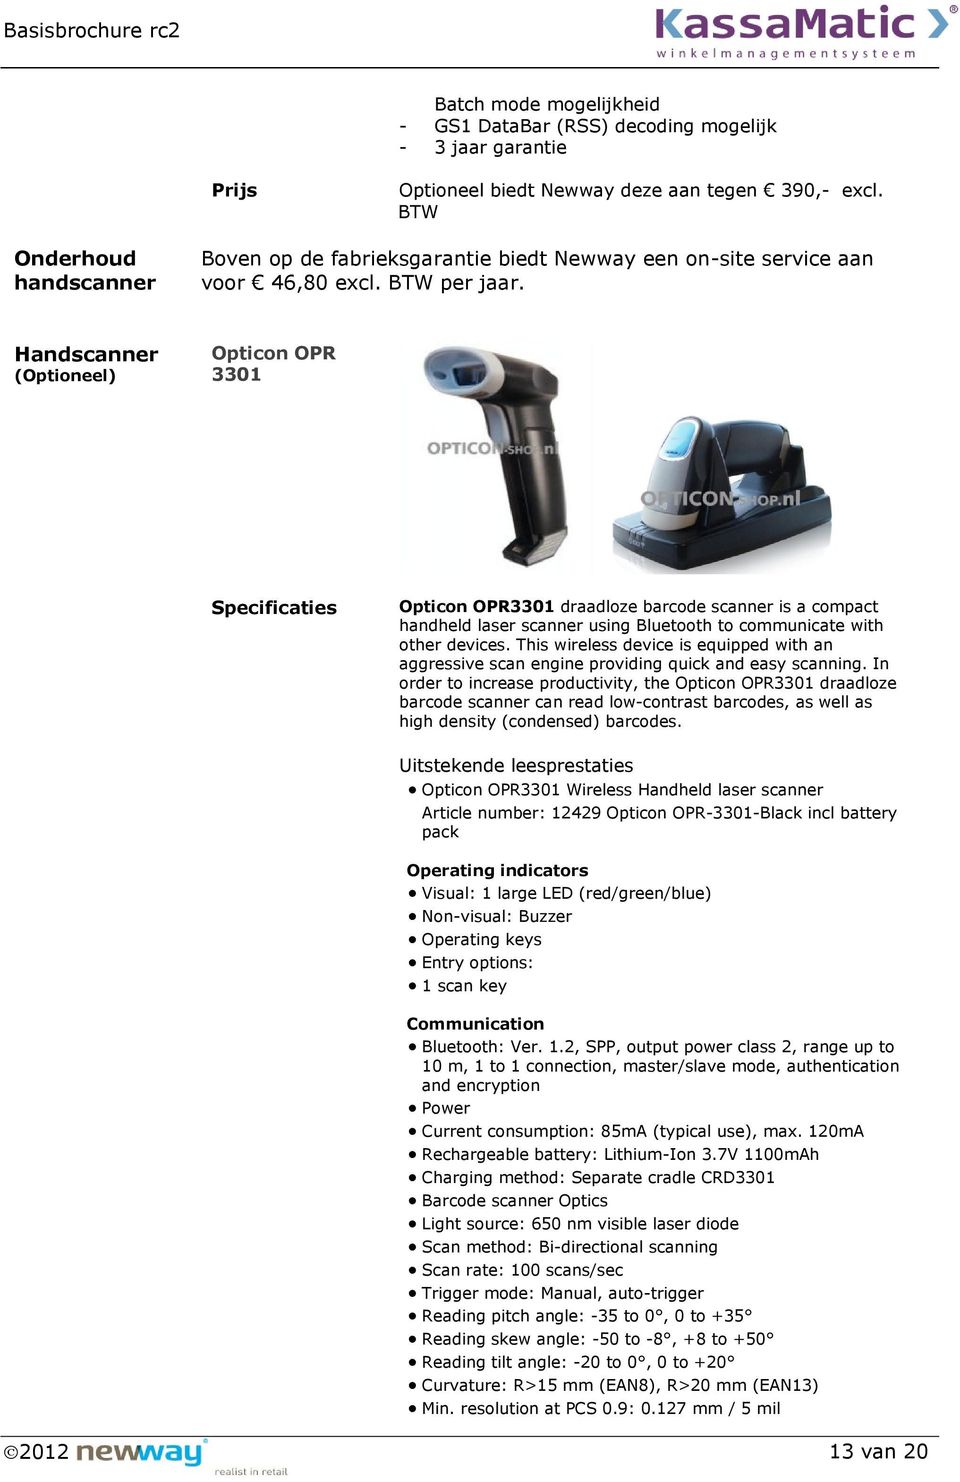 Handscanner (Optioneel) Opticon OPR 3301 Opticon OPR3301 draadloze barcode scanner is a compact handheld laser scanner using Bluetooth to communicate with other devices.